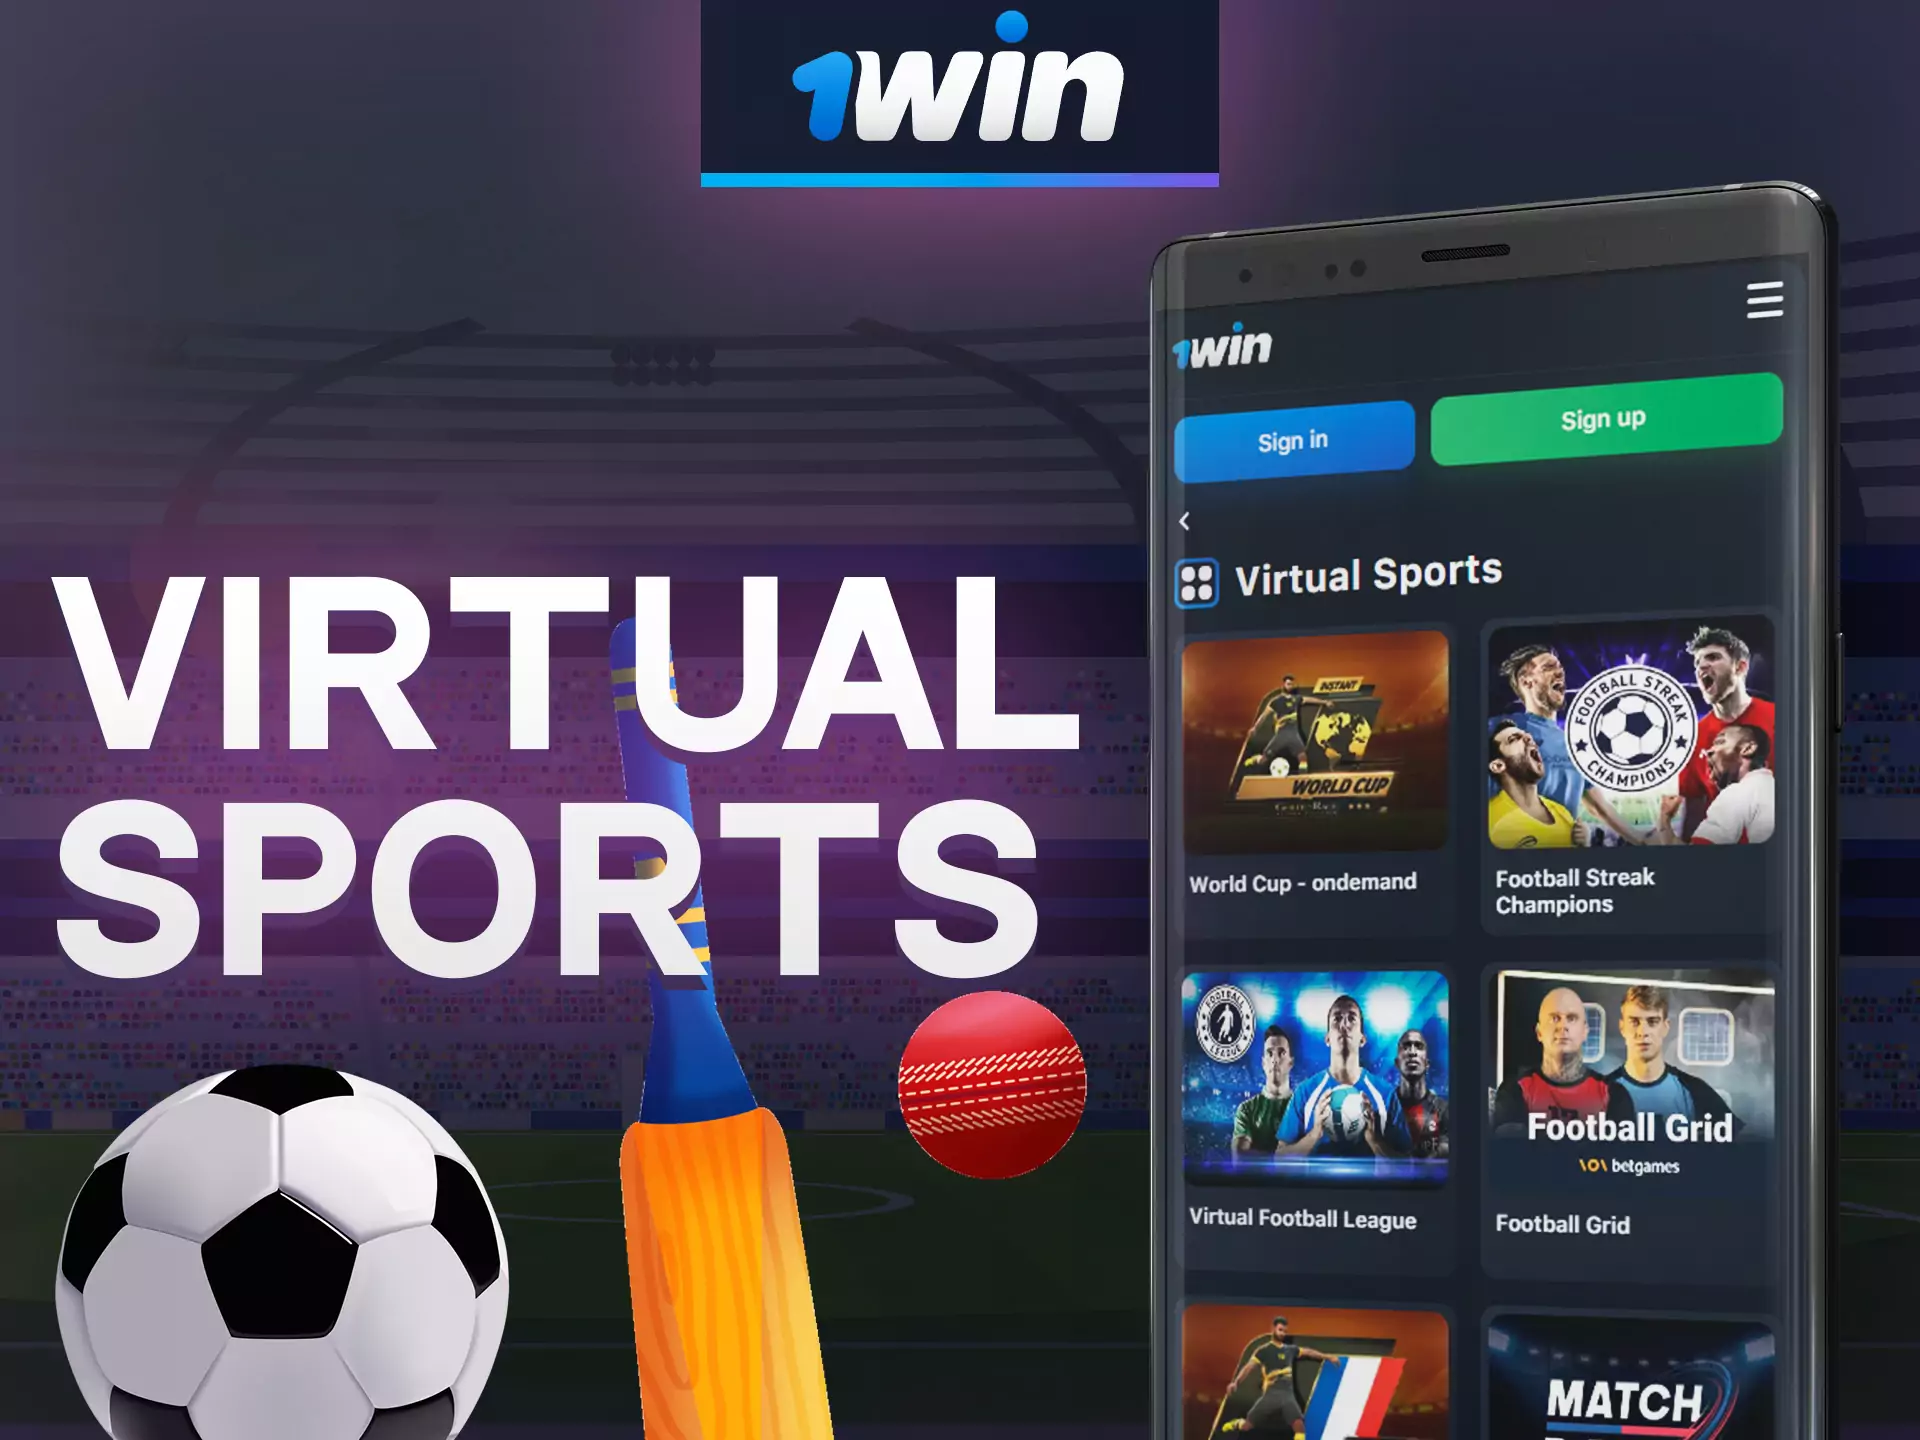 Bet on virtual sports and win money using 1win app.